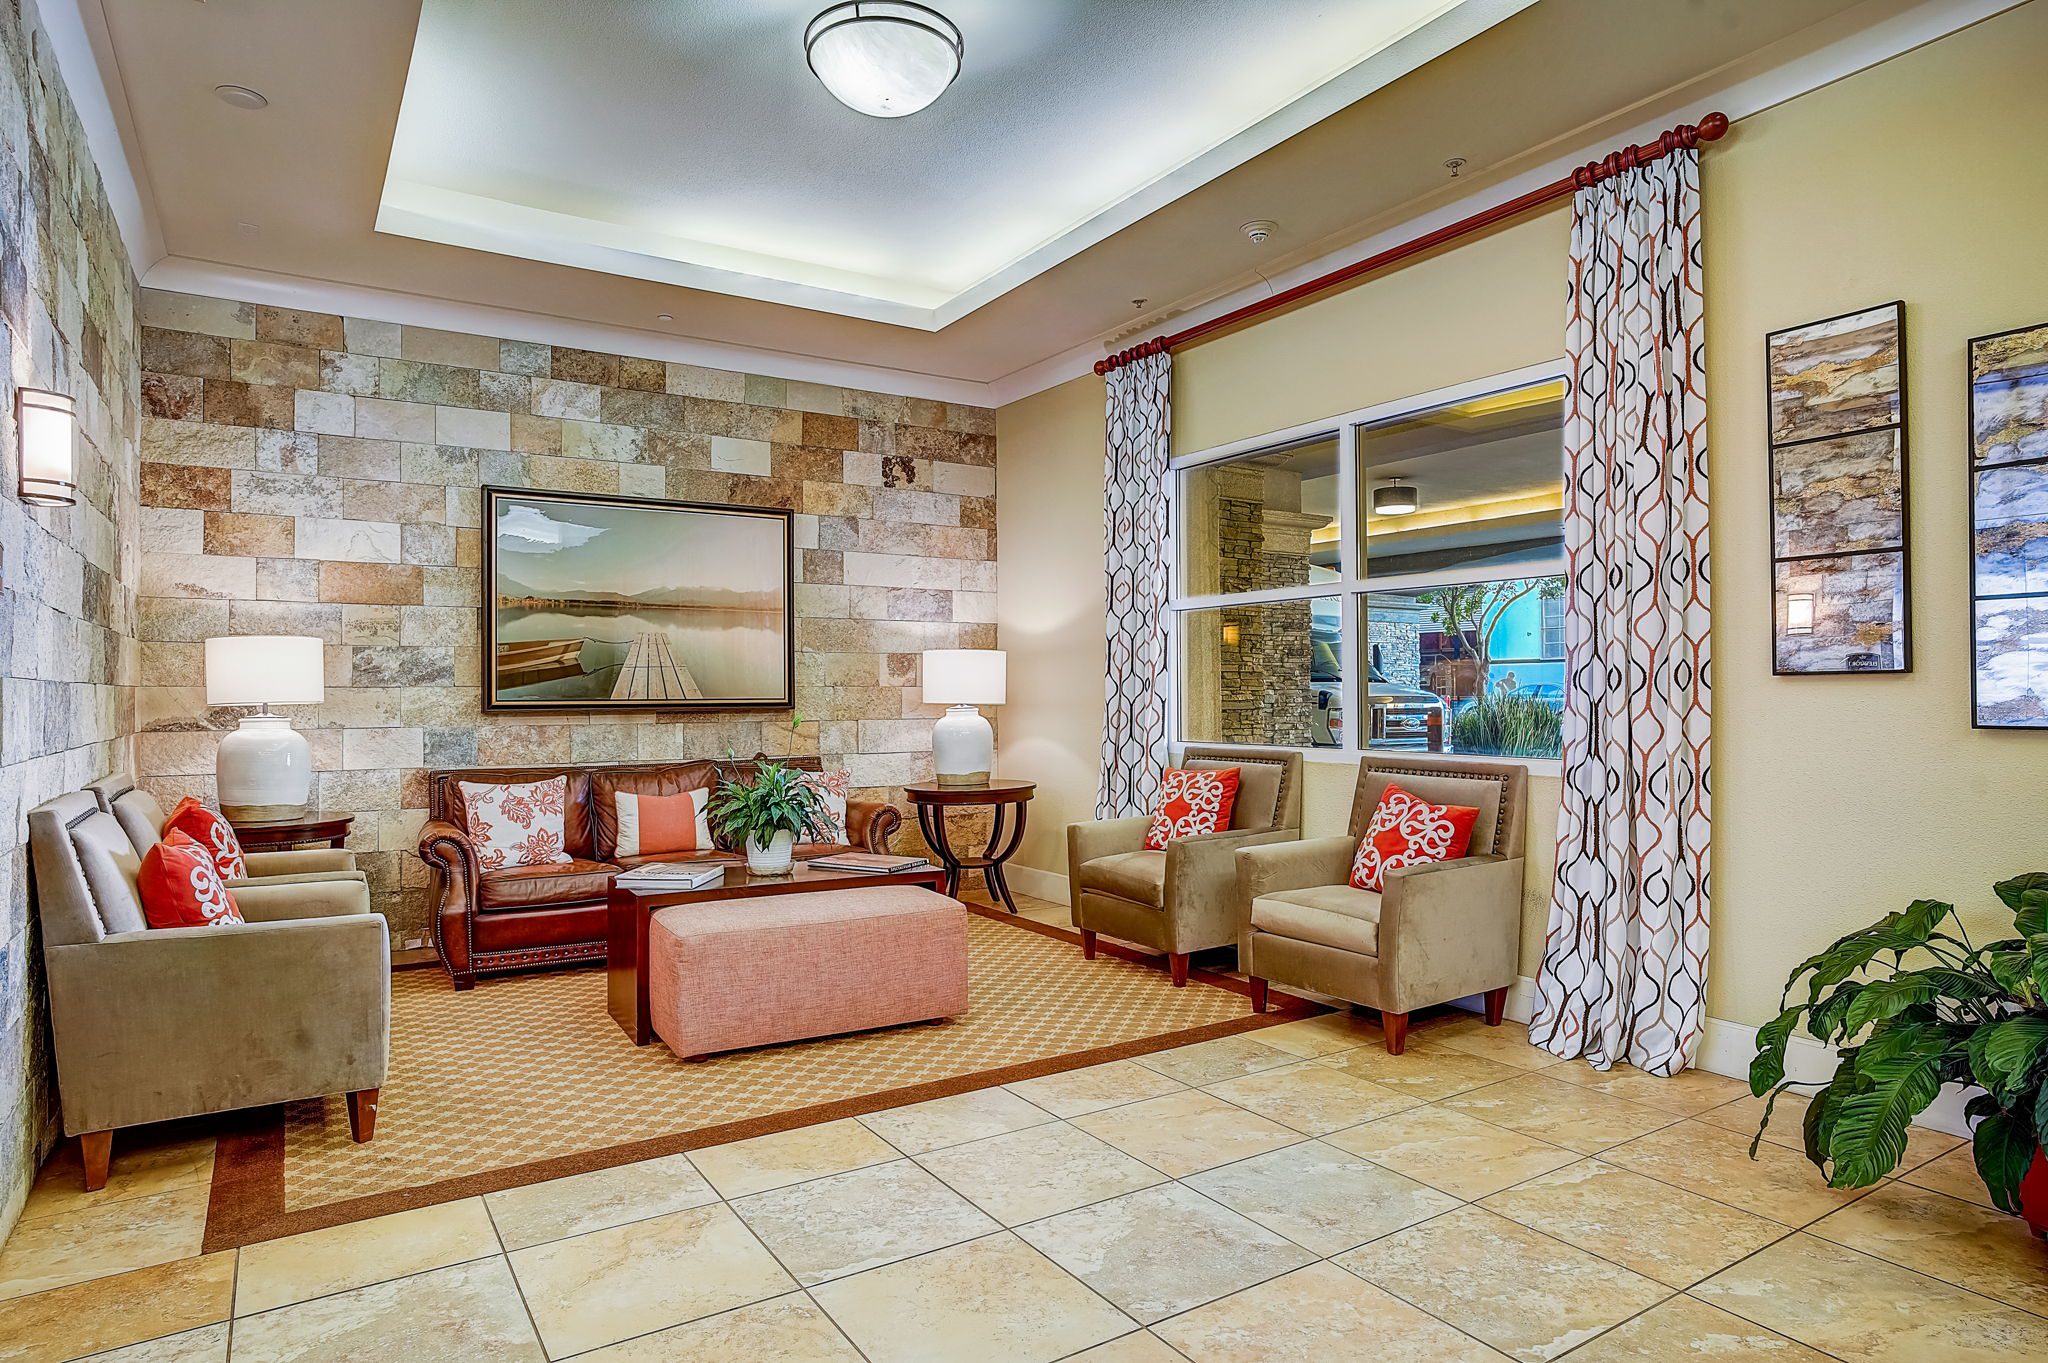 The hotel lobby showcases stone walls and a sizable flat screen TV.